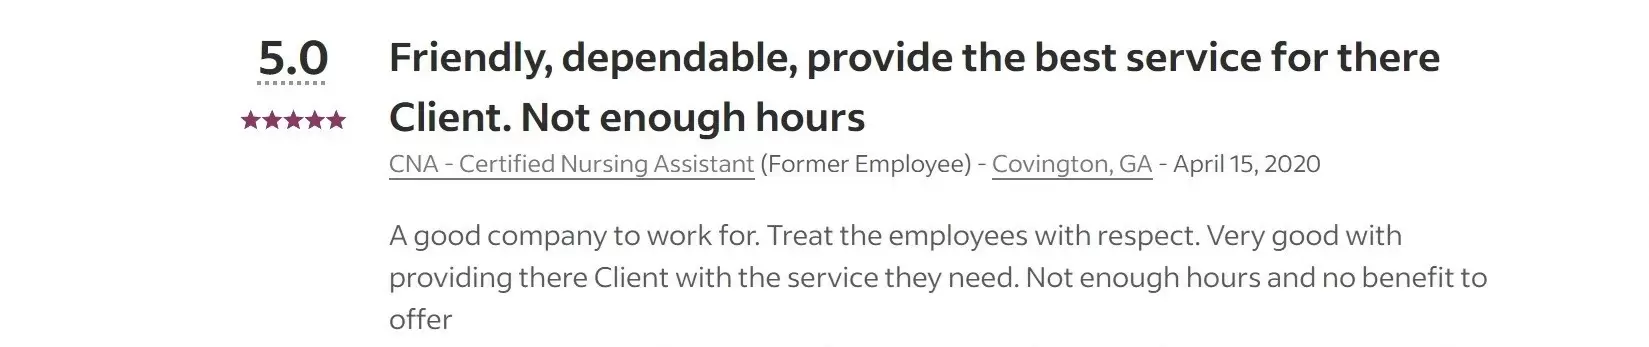 Positive employee review of this agency